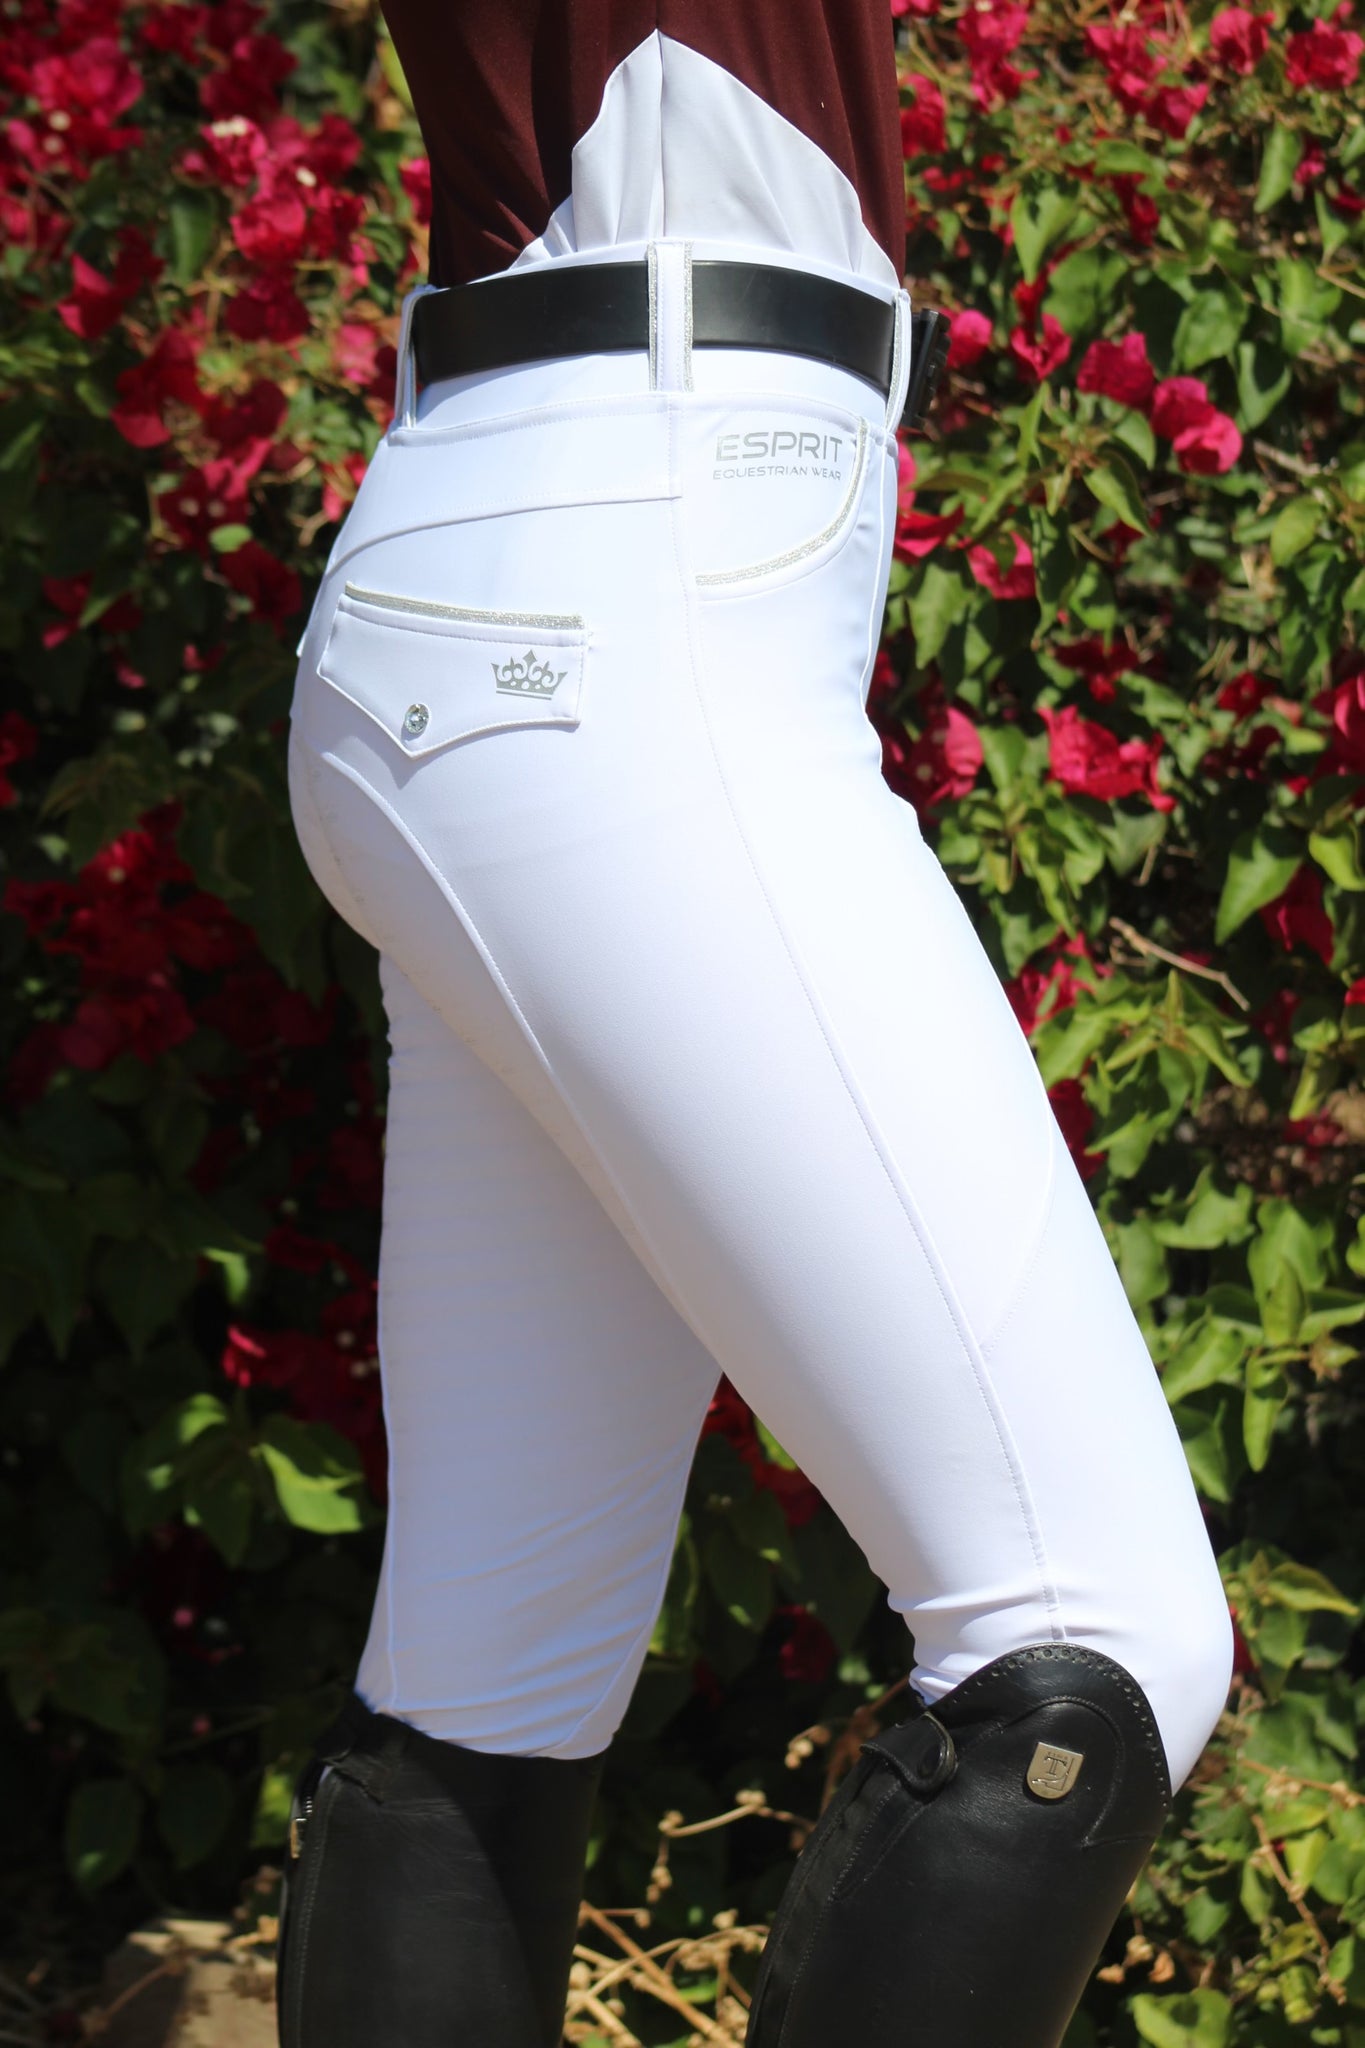 Equiboodle Riding Tights - White XL 30-36”